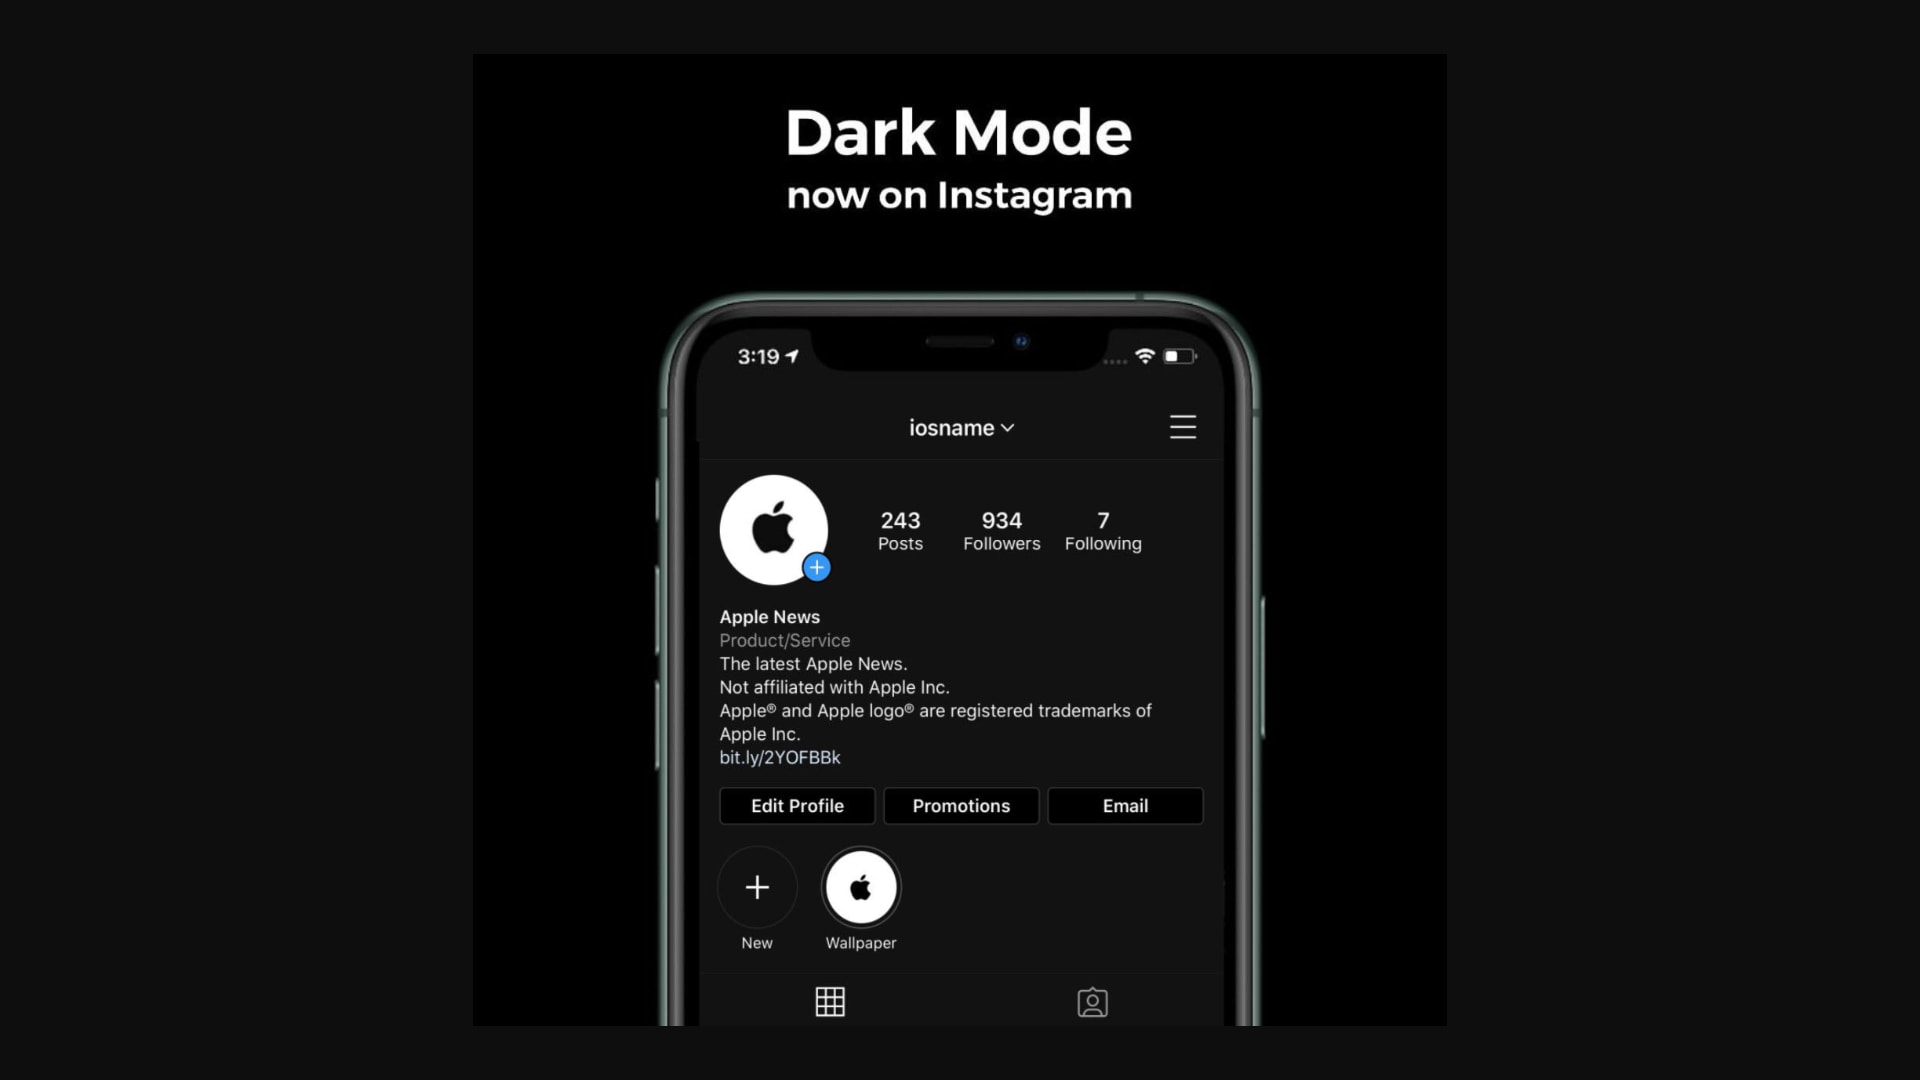 Instagram Dark Mode feature comes to iPhone